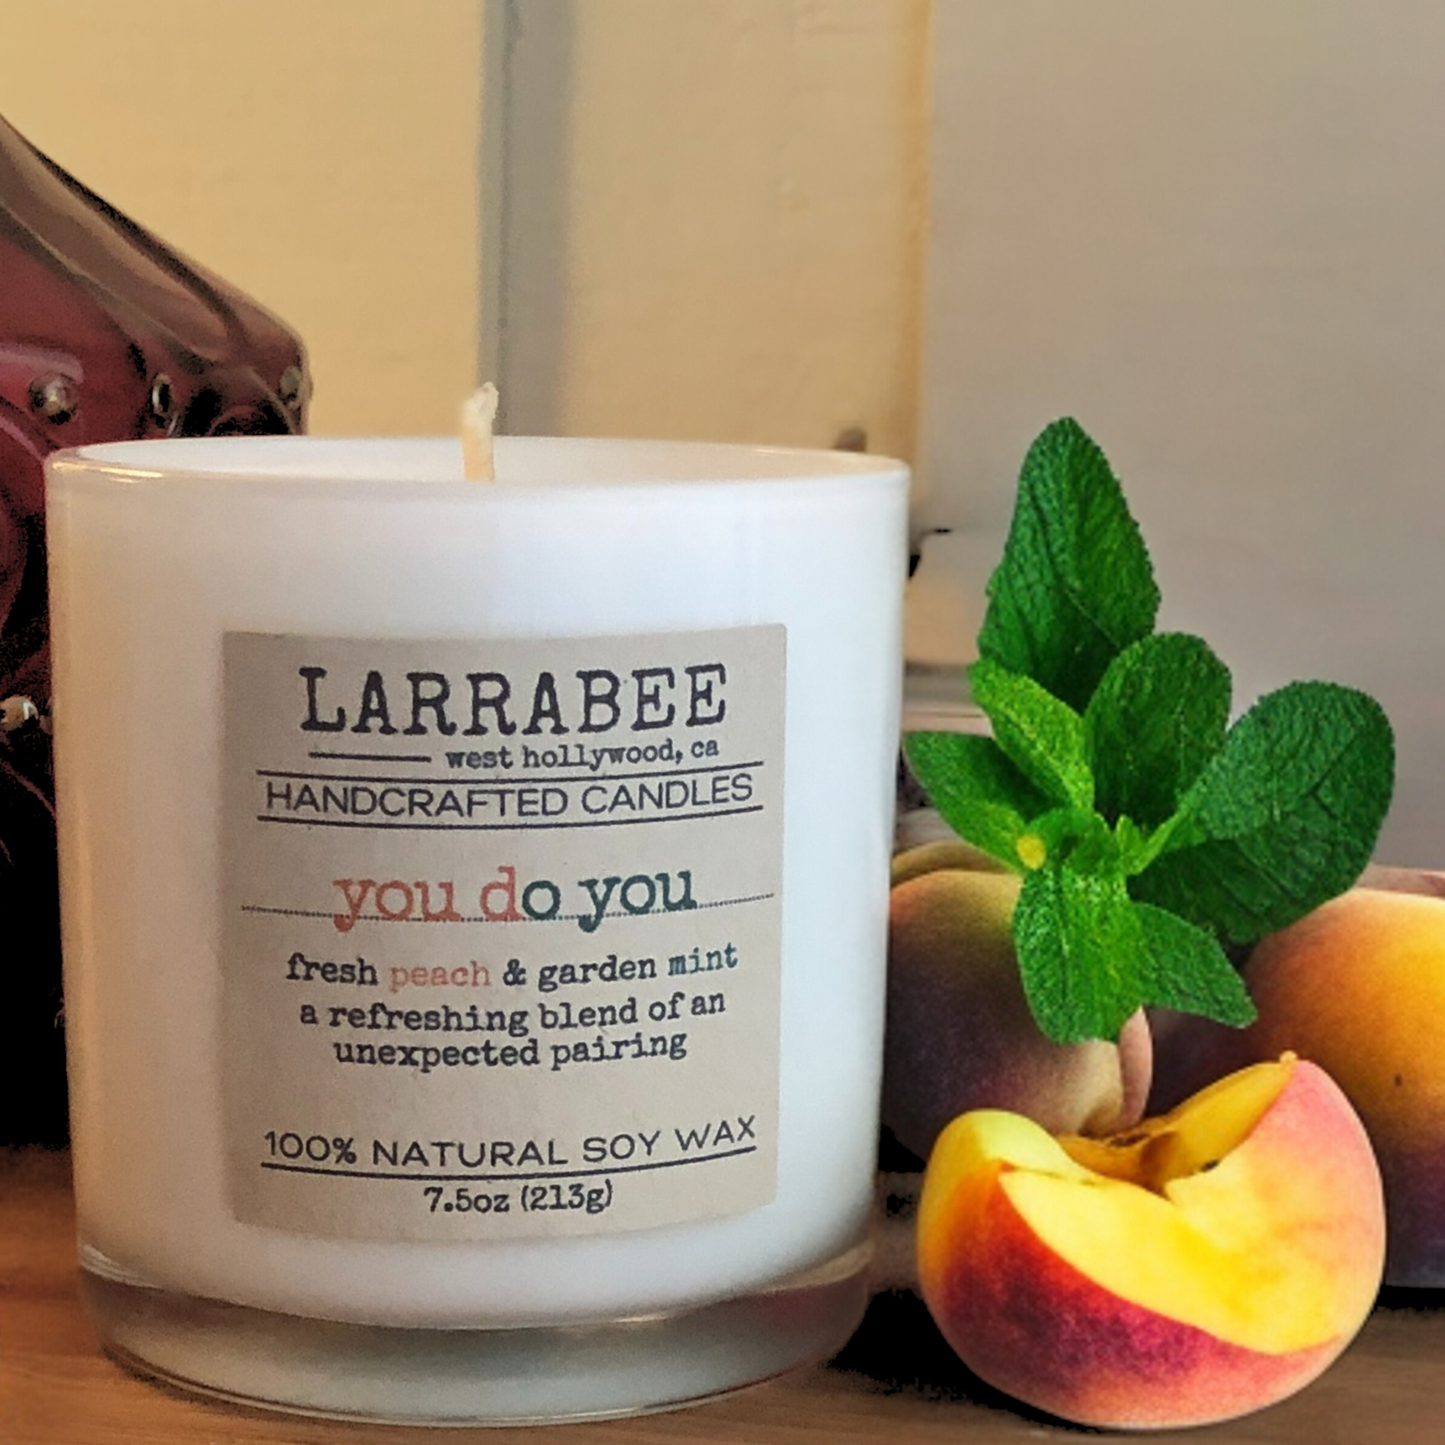 You Do You handcrafted candle